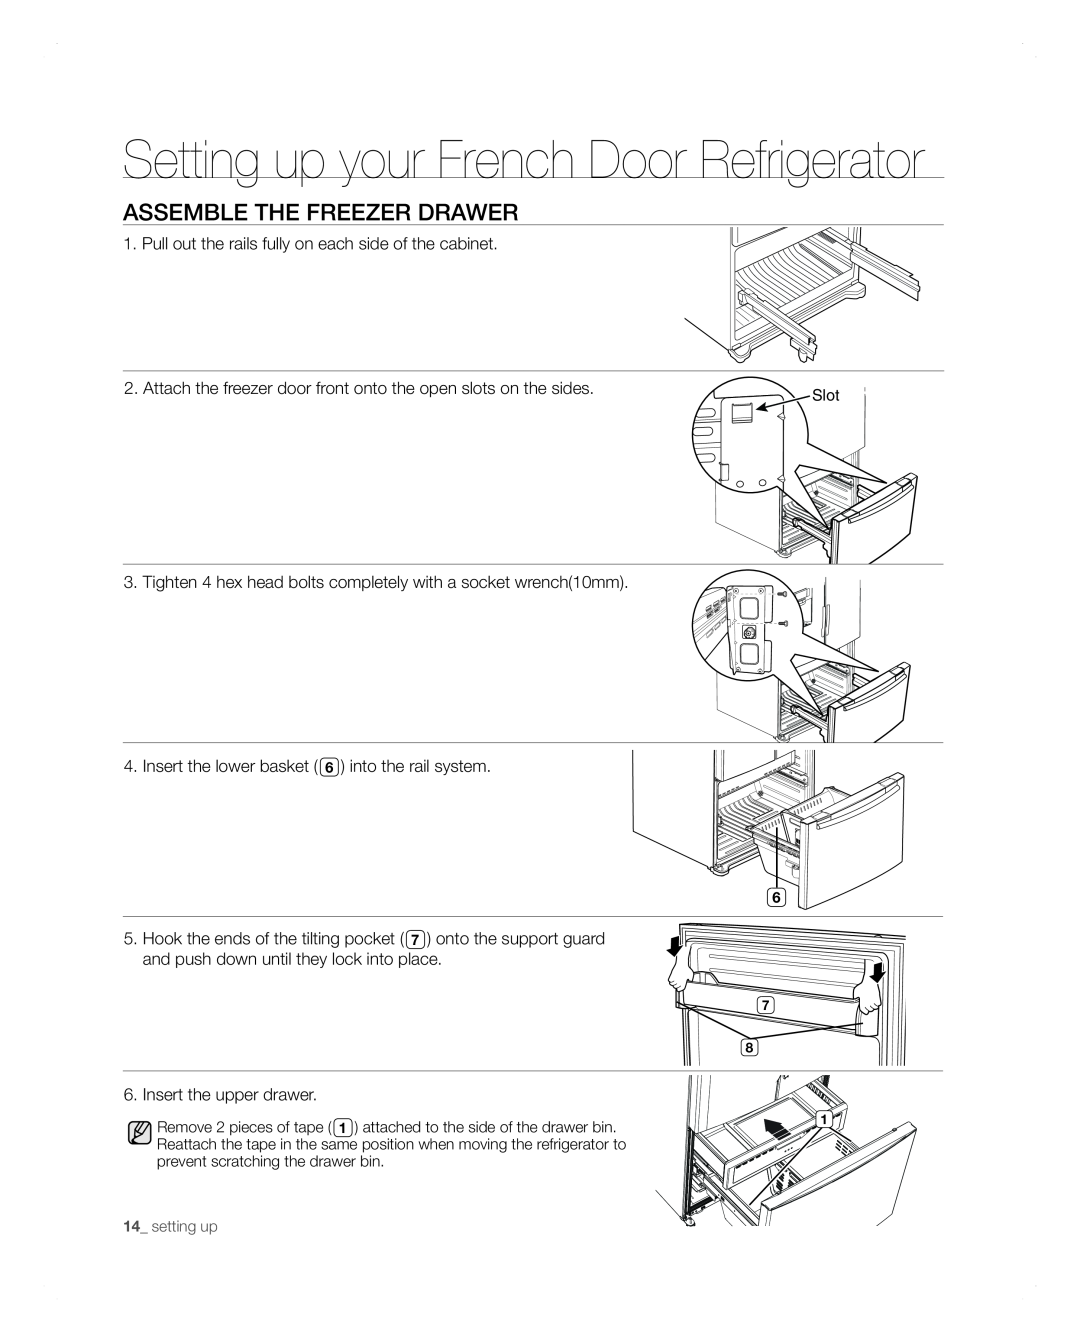 Samsung RFG297AARS user manual assemble the freezer drawer, Setting up your French Door Refrigerator 